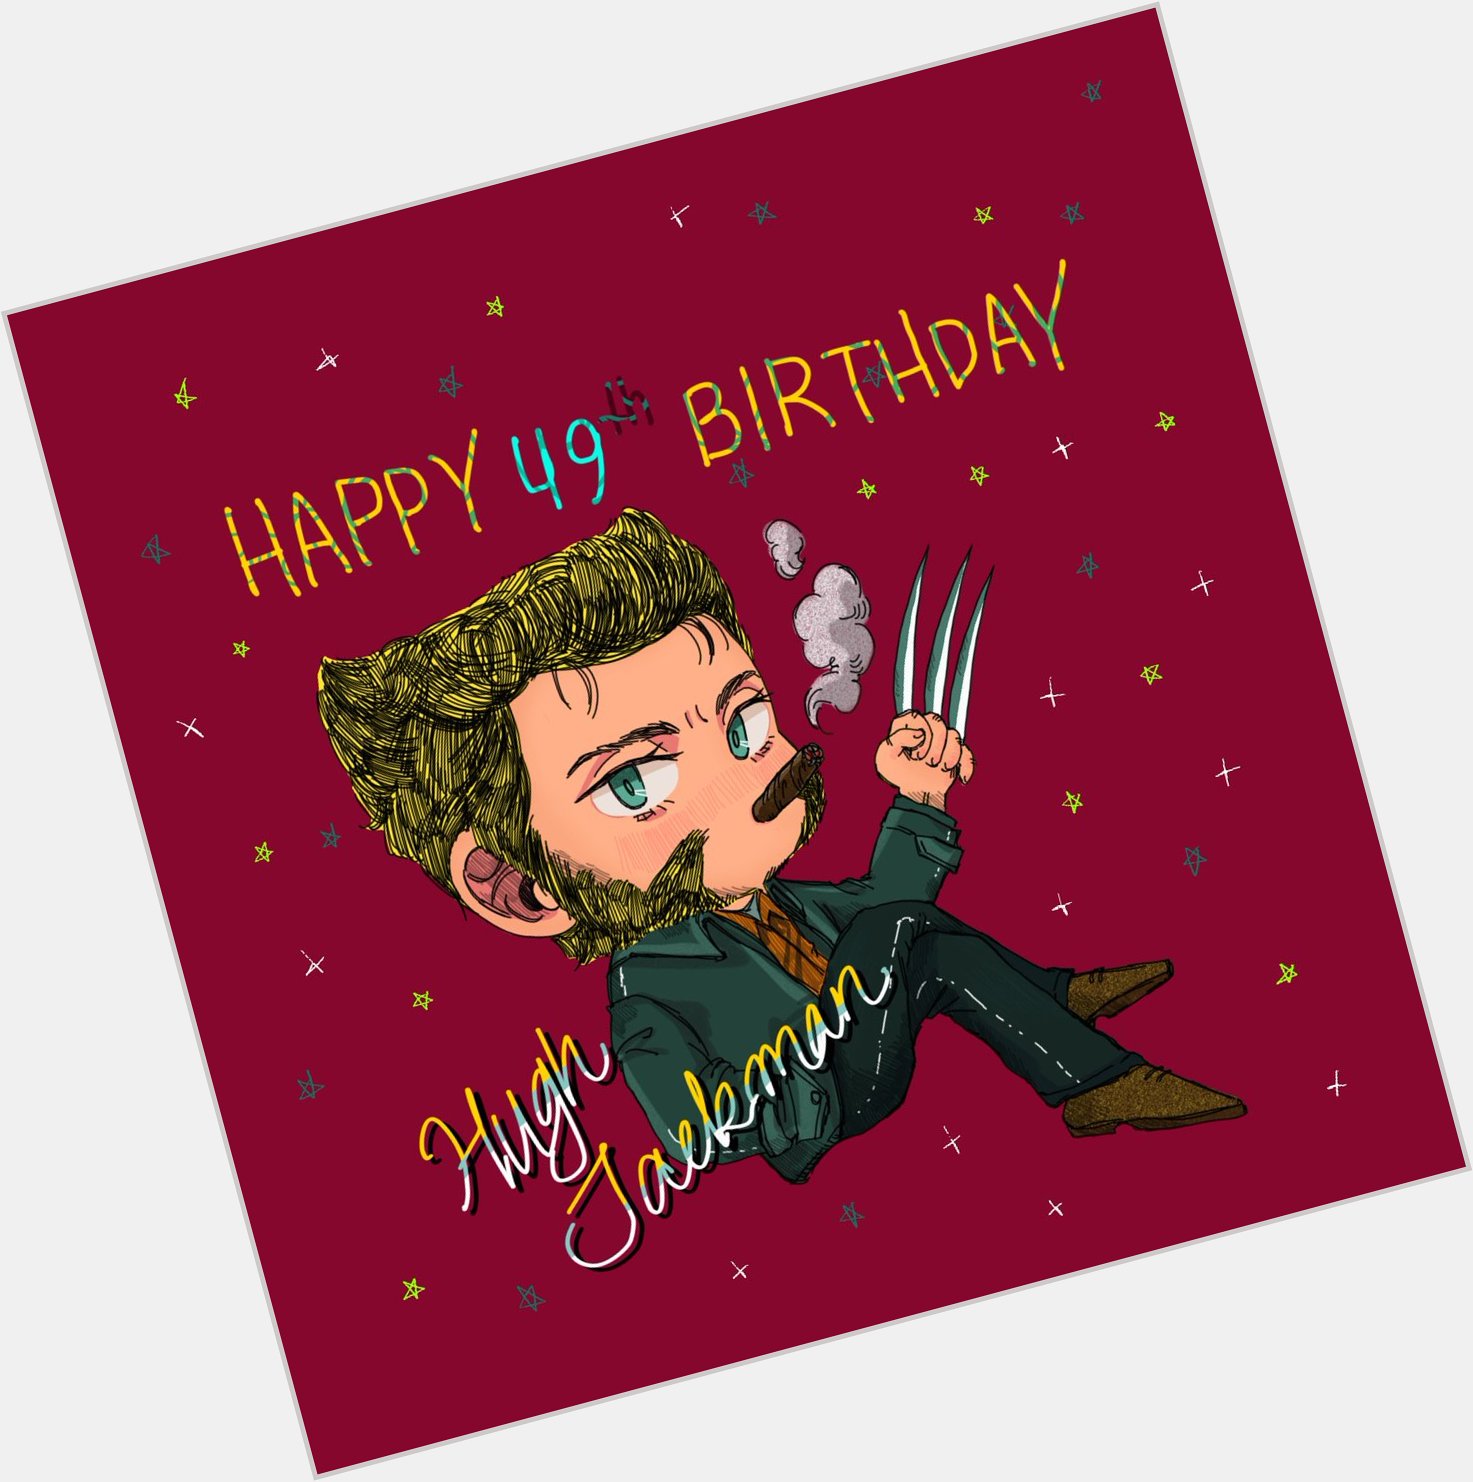    OCT 12TH        (?)            !
HAPPY BIRTHDAY HUGH JACKMAN my one and only Wolverine 